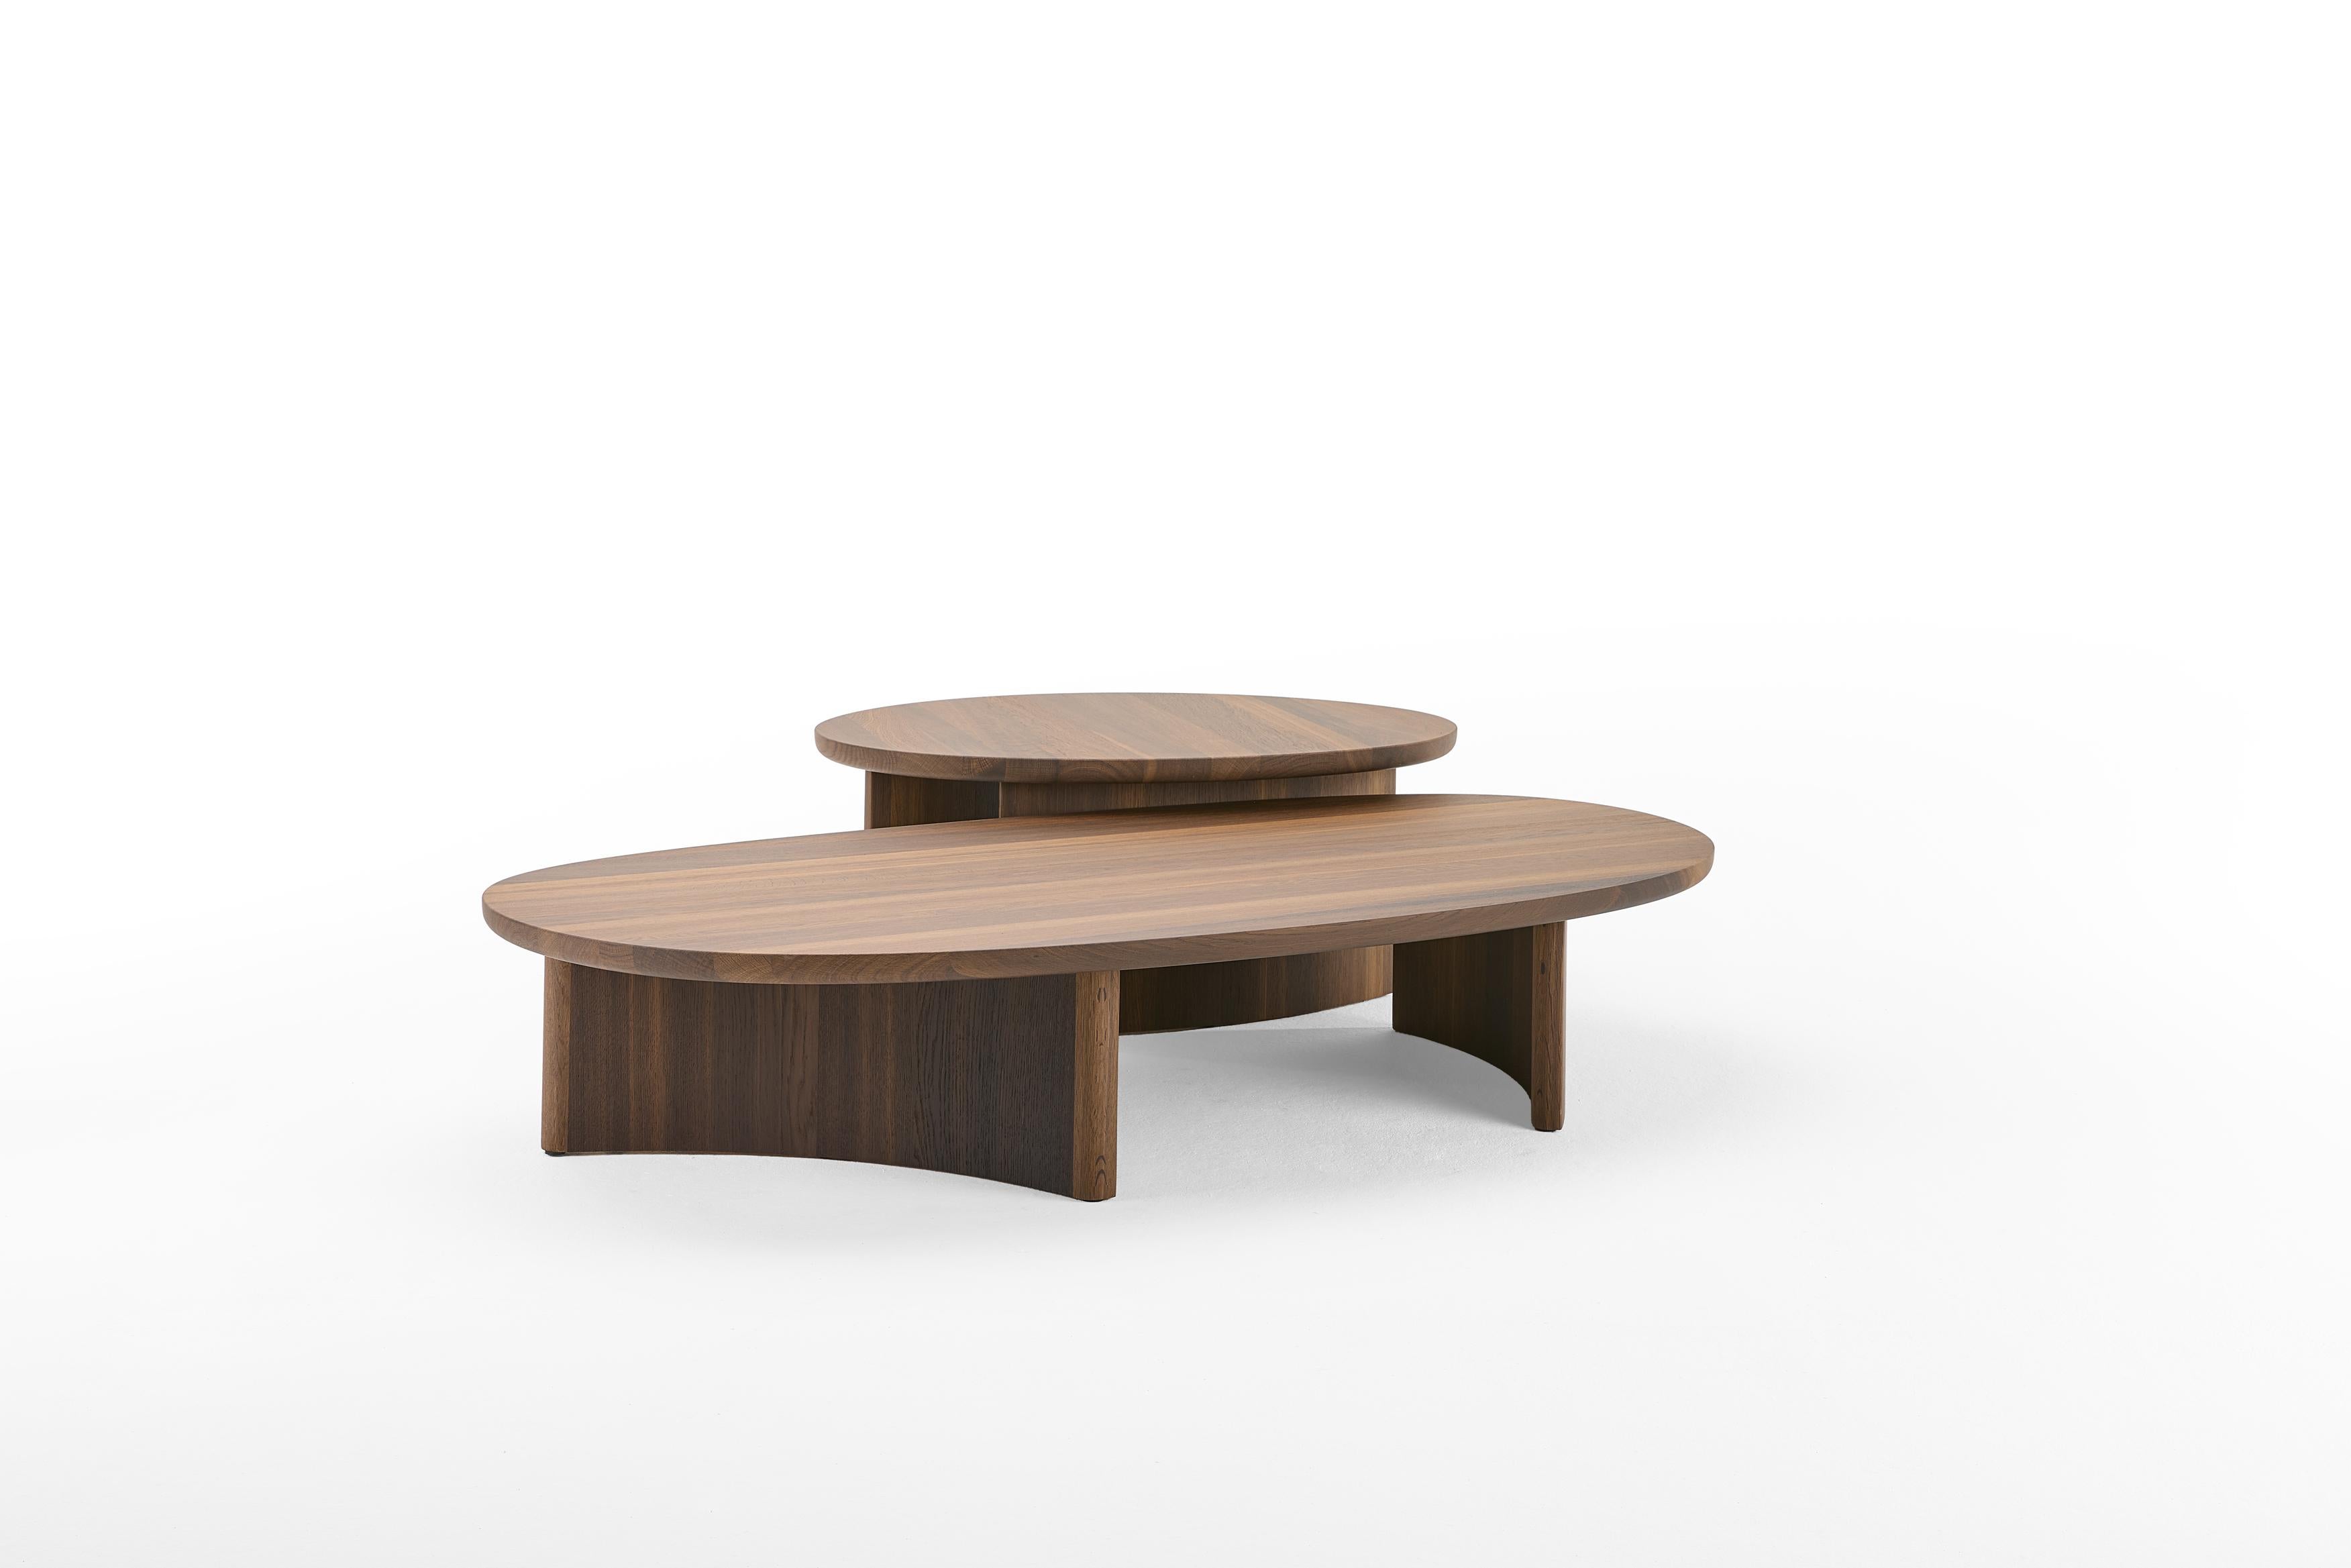 DIFFERENT DIMENSIONS & FINISHES AVAILABLE.
SIZE ADVERTISED: 160x85x30 & 90x74x37.5 IN WALNUT

The Dew coffee table was designed by the distinguished Sabine Marcelis and is a follow-up to the Dew dining table. Like the dining table, the Dew coffee